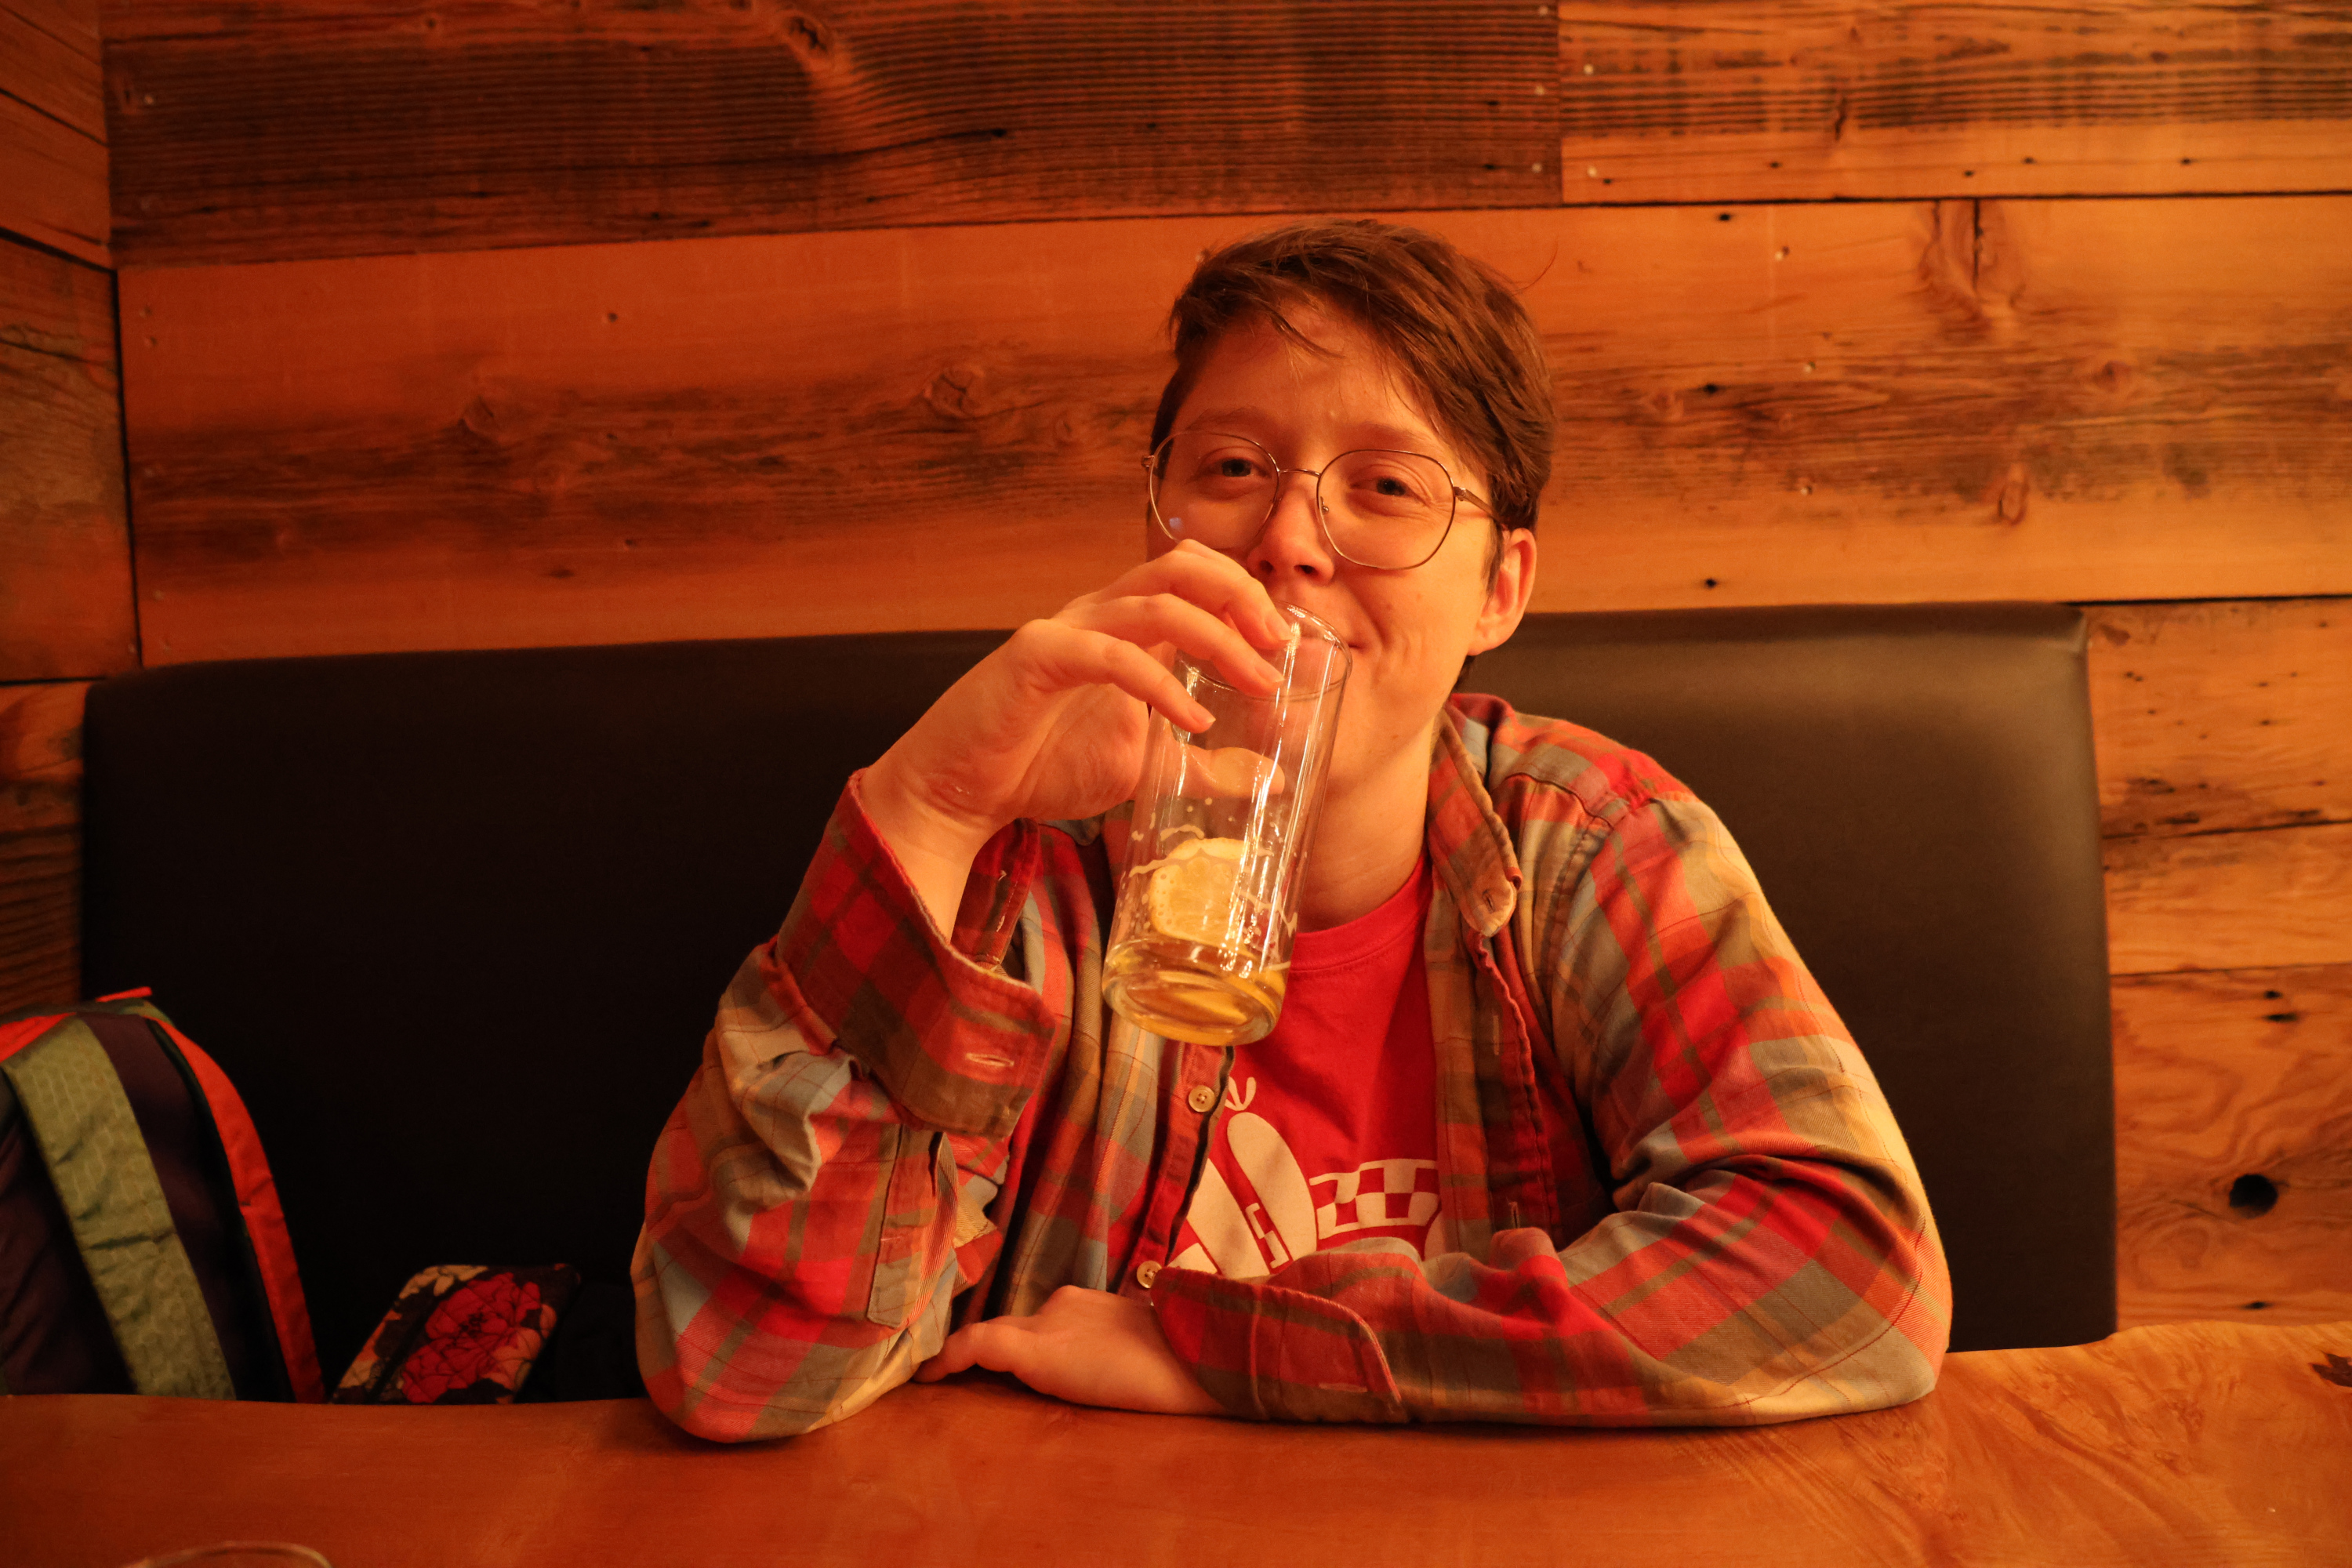 My partner Morrie sitting in a restaurant booth with rustic wood paneling behind her. She's lifting a nearly empty beer glass to her mouth, and smiling tolerantly.